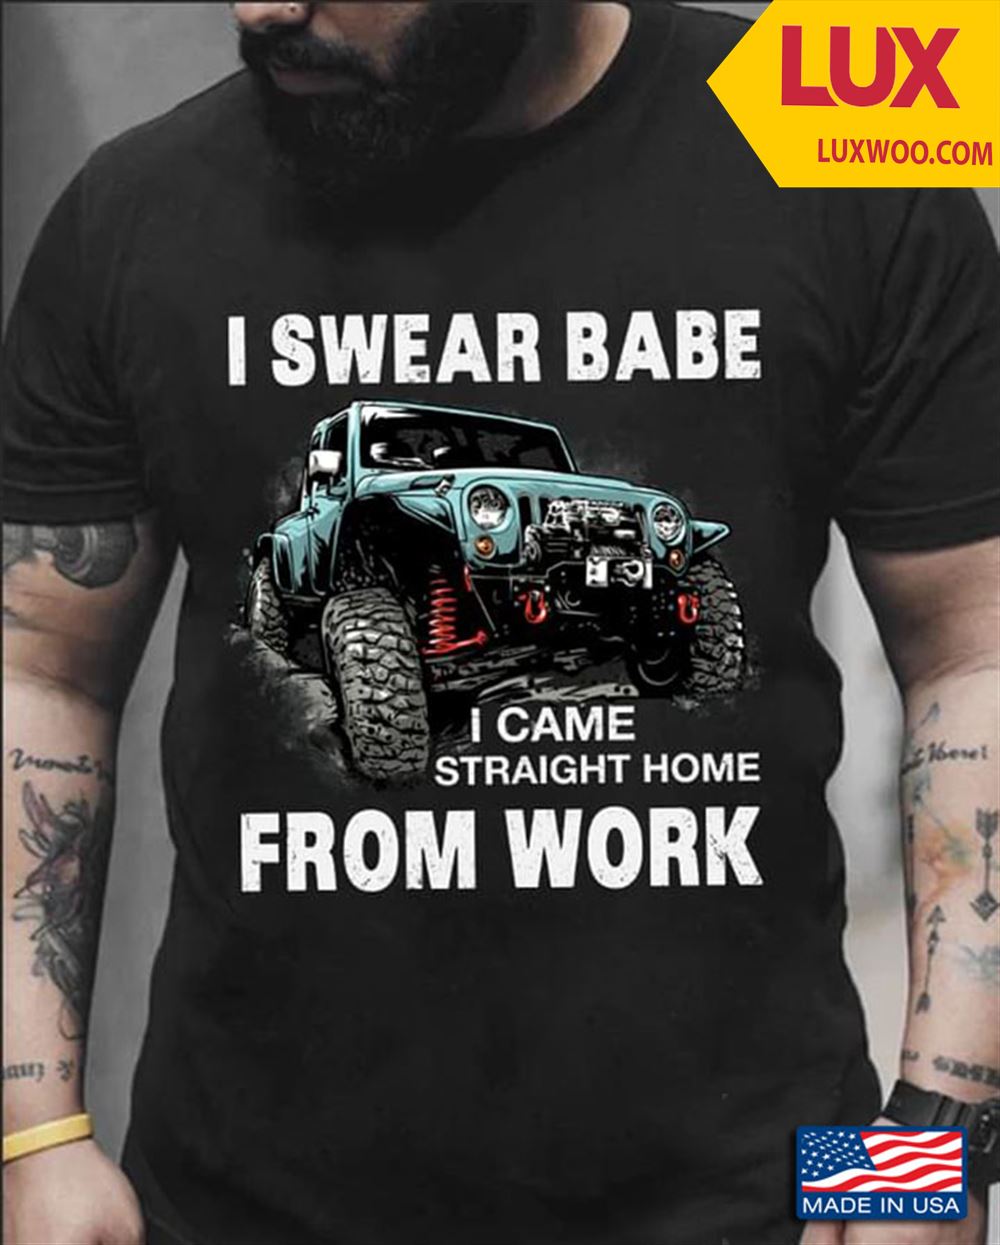 I Swear Babe I Came Straight Home From Work Jeep Tshirt Size Up To 5xl